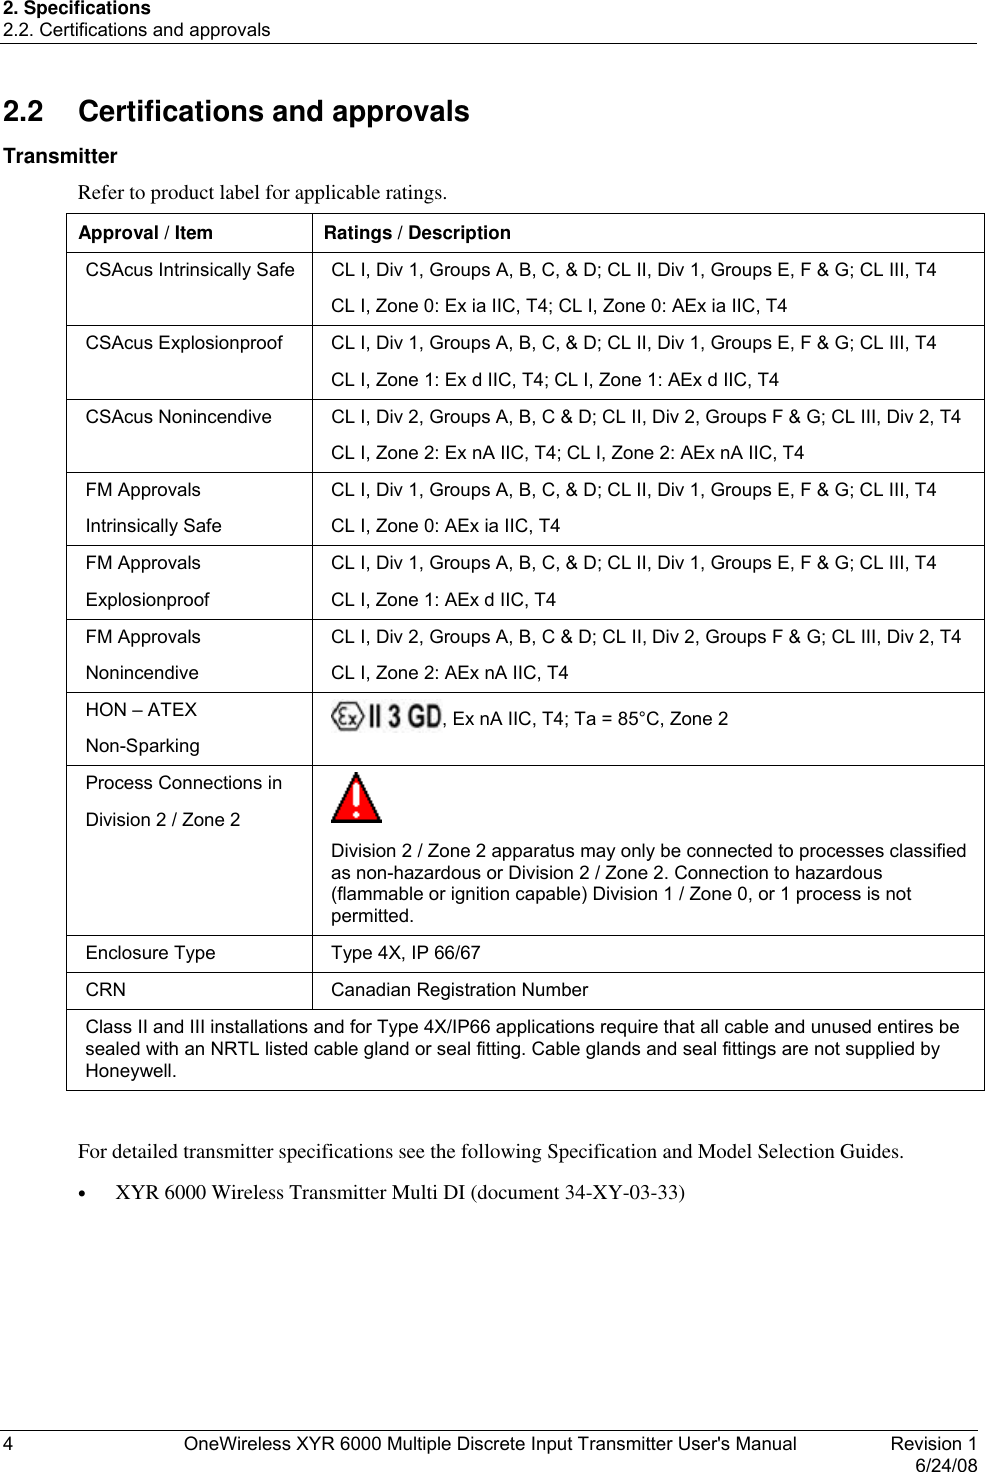 2. Specifications 2.2. Certifications and approvals 4  OneWireless XYR 6000 Multiple Discrete Input Transmitter User&apos;s Manual   Revision 1   6/24/08 2.2  Certifications and approvals Transmitter Refer to product label for applicable ratings. Approval / Item  Ratings / Description CSAcus Intrinsically Safe  CL I, Div 1, Groups A, B, C, &amp; D; CL II, Div 1, Groups E, F &amp; G; CL III, T4 CL I, Zone 0: Ex ia IIC, T4; CL I, Zone 0: AEx ia IIC, T4  CSAcus Explosionproof  CL I, Div 1, Groups A, B, C, &amp; D; CL II, Div 1, Groups E, F &amp; G; CL III, T4 CL I, Zone 1: Ex d IIC, T4; CL I, Zone 1: AEx d IIC, T4 CSAcus Nonincendive  CL I, Div 2, Groups A, B, C &amp; D; CL II, Div 2, Groups F &amp; G; CL III, Div 2, T4 CL I, Zone 2: Ex nA IIC, T4; CL I, Zone 2: AEx nA IIC, T4 FM Approvals Intrinsically Safe CL I, Div 1, Groups A, B, C, &amp; D; CL II, Div 1, Groups E, F &amp; G; CL III, T4 CL I, Zone 0: AEx ia IIC, T4  FM Approvals Explosionproof CL I, Div 1, Groups A, B, C, &amp; D; CL II, Div 1, Groups E, F &amp; G; CL III, T4 CL I, Zone 1: AEx d IIC, T4 FM Approvals Nonincendive CL I, Div 2, Groups A, B, C &amp; D; CL II, Div 2, Groups F &amp; G; CL III, Div 2, T4 CL I, Zone 2: AEx nA IIC, T4 HON – ATEX Non-Sparking , Ex nA IIC, T4; Ta = 85°C, Zone 2 Process Connections in Division 2 / Zone 2    Division 2 / Zone 2 apparatus may only be connected to processes classified as non-hazardous or Division 2 / Zone 2. Connection to hazardous (flammable or ignition capable) Division 1 / Zone 0, or 1 process is not permitted. Enclosure Type  Type 4X, IP 66/67 CRN  Canadian Registration Number Class II and III installations and for Type 4X/IP66 applications require that all cable and unused entires be sealed with an NRTL listed cable gland or seal fitting. Cable glands and seal fittings are not supplied by Honeywell.  For detailed transmitter specifications see the following Specification and Model Selection Guides. •  XYR 6000 Wireless Transmitter Multi DI (document 34-XY-03-33) 